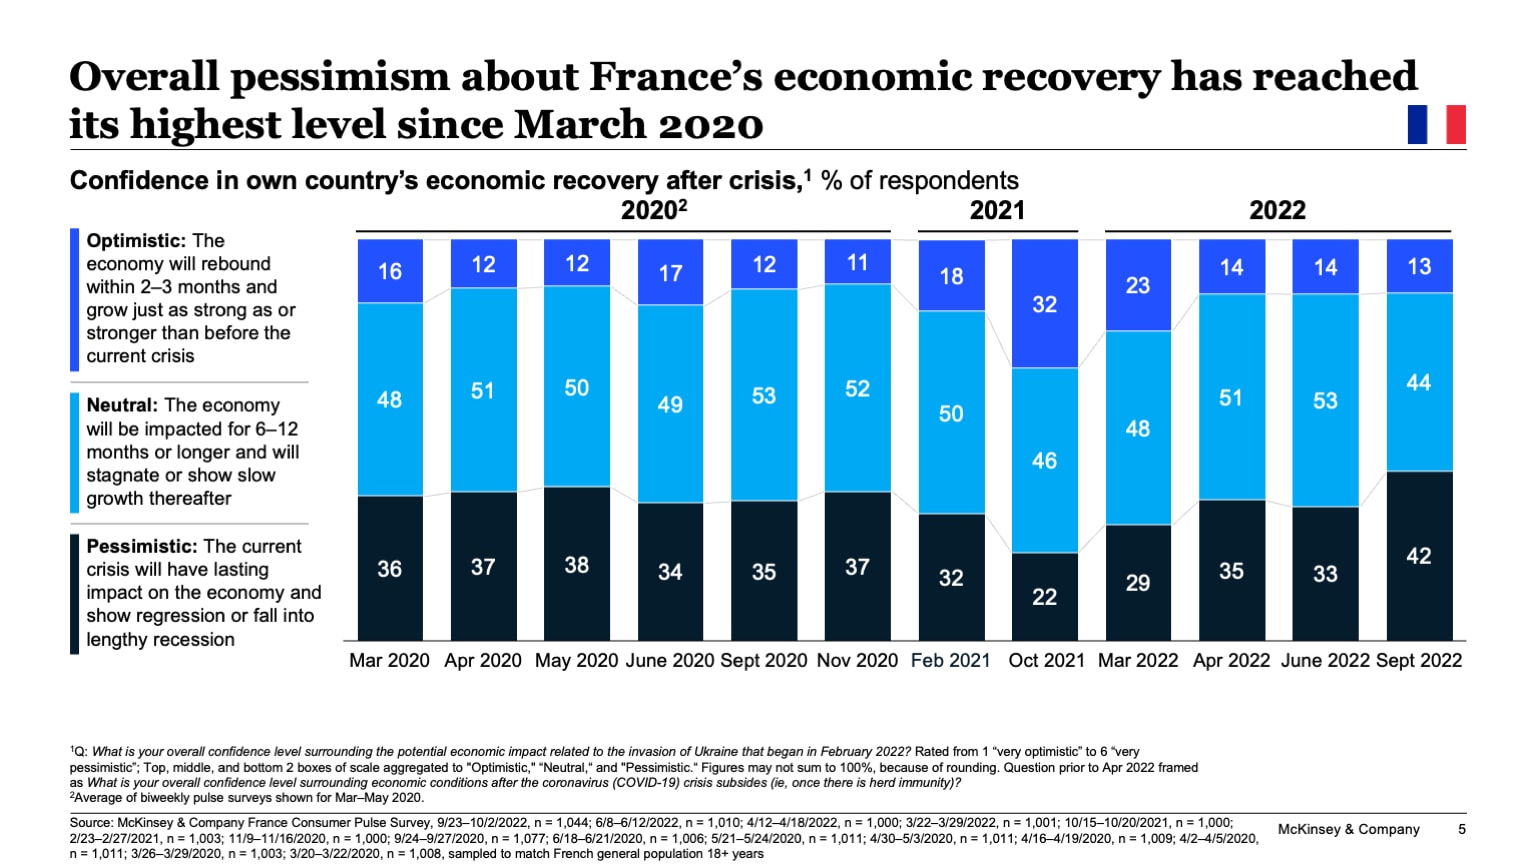 Overall pessimism about France’s economic recovery has reached its highest level since March 2020